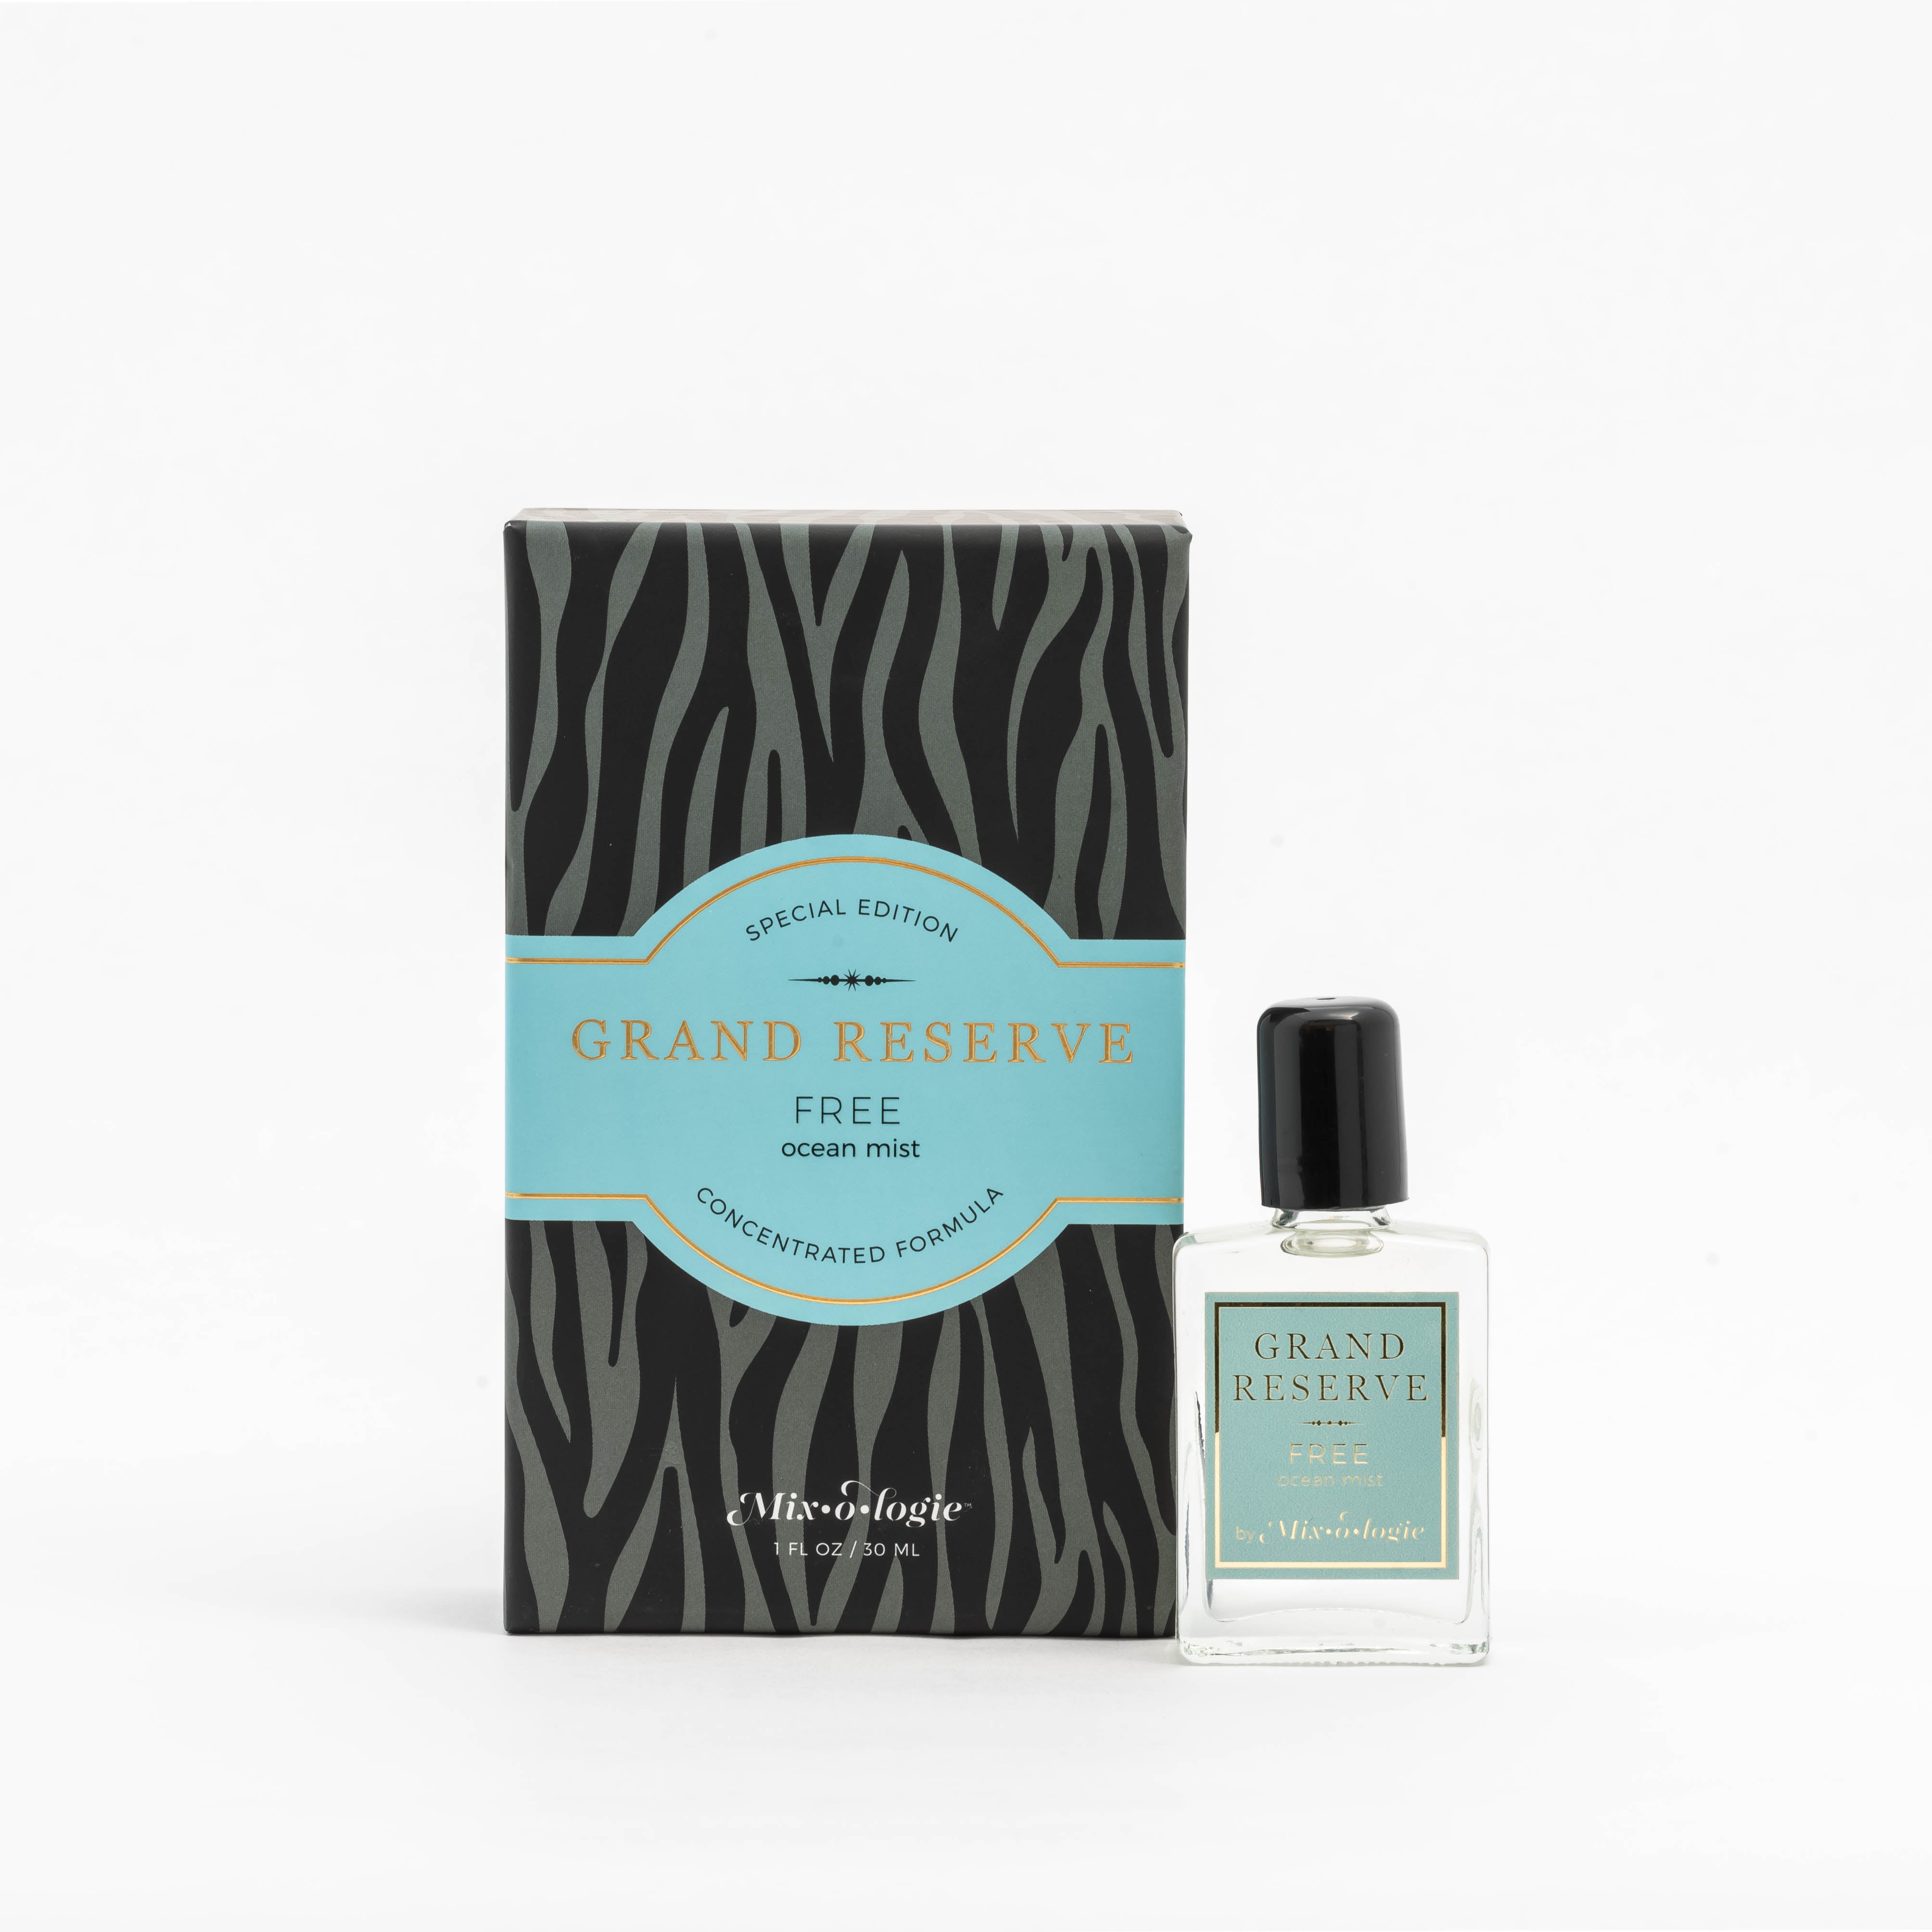 Special edition grand reserve rollerball perfume scented with a concentrated formula of Free (ocean mist)